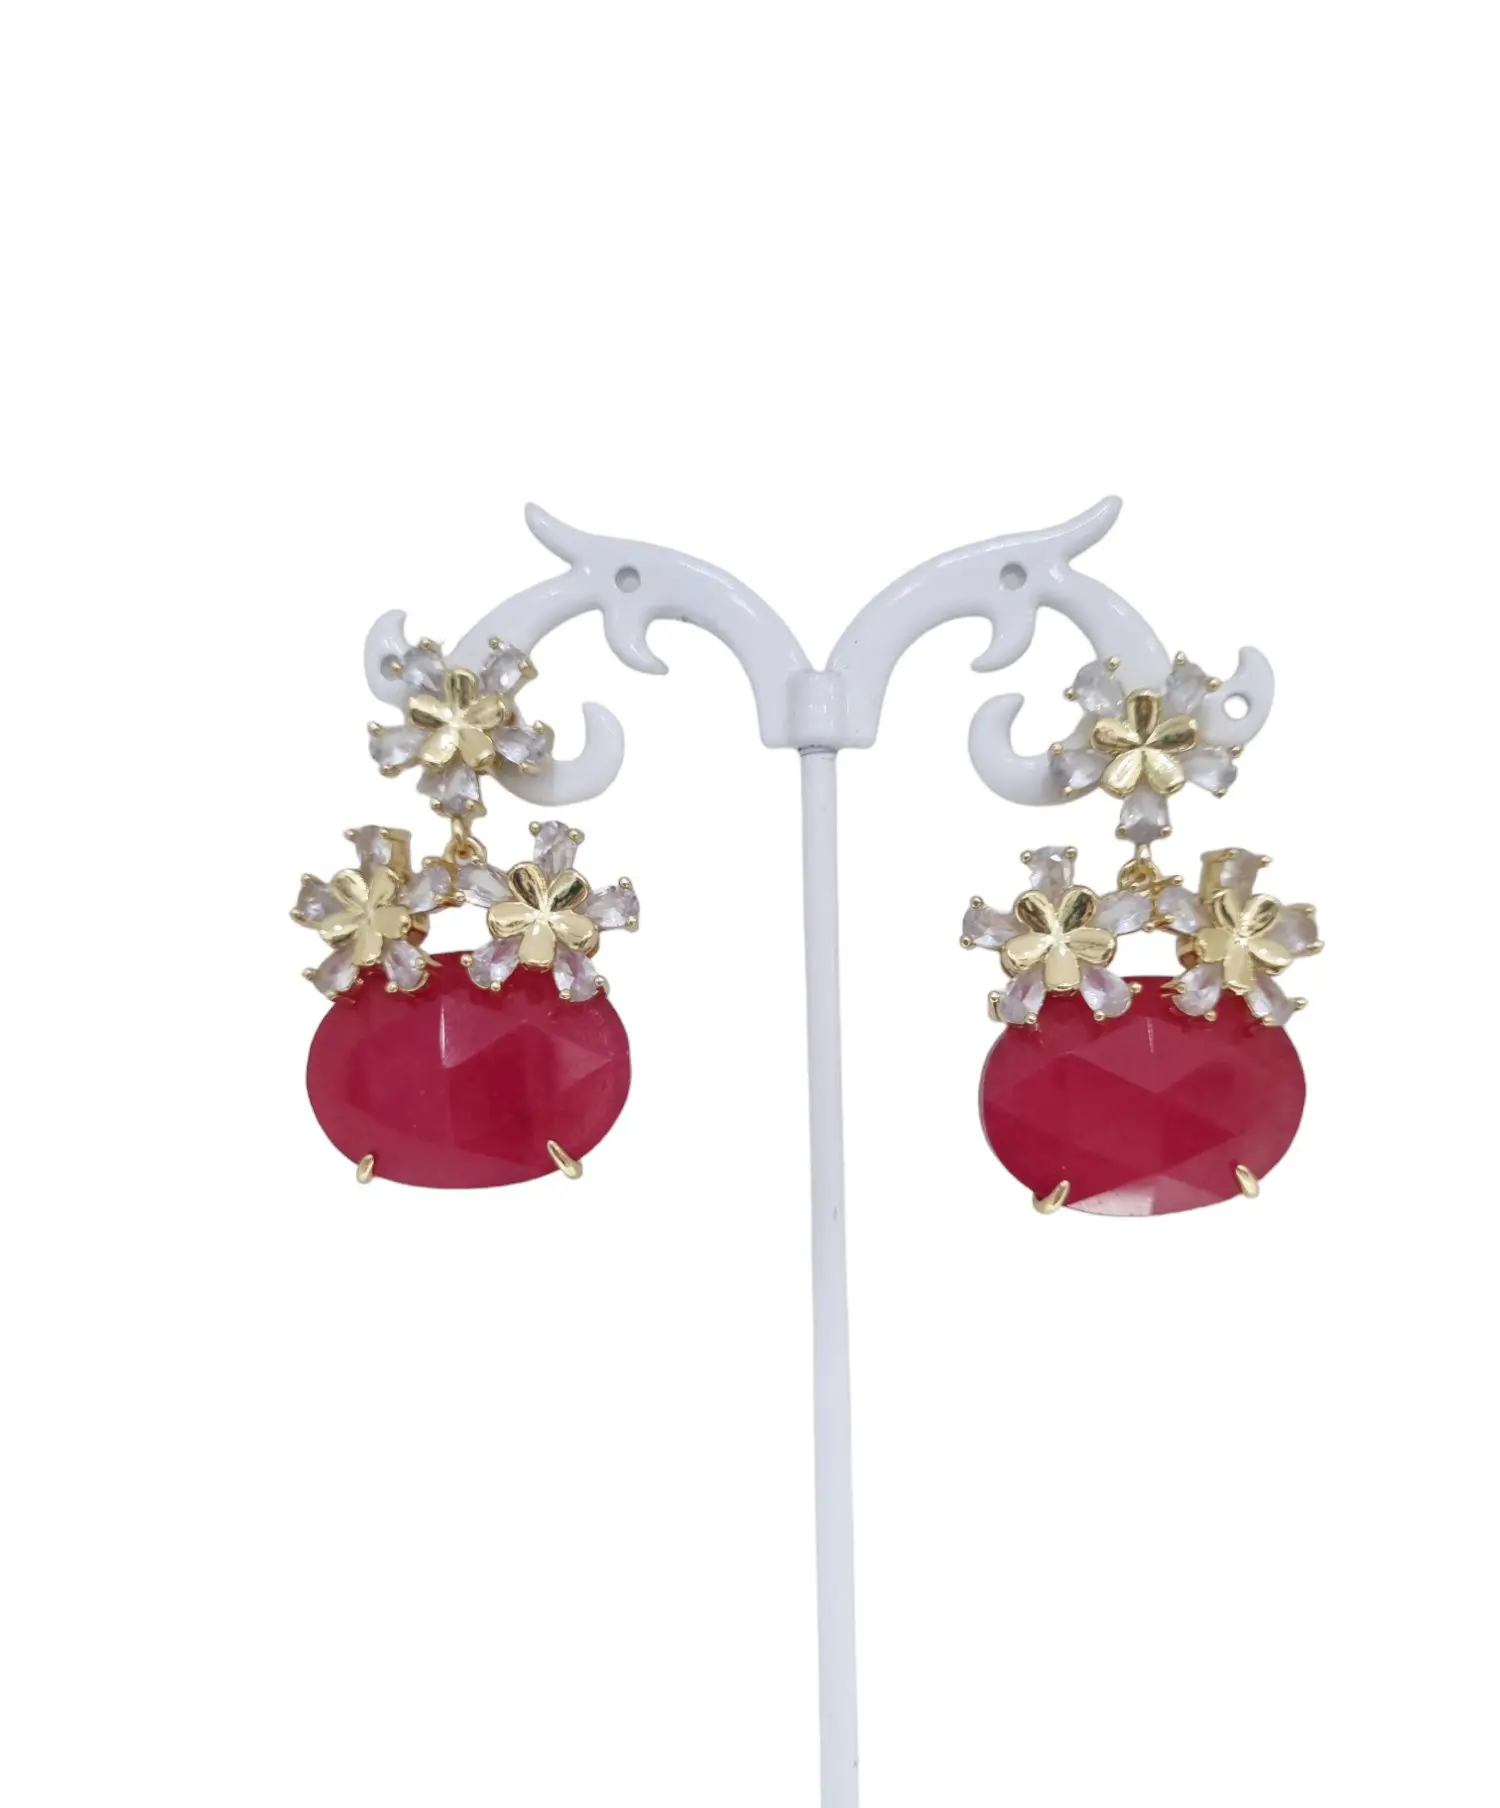 Earrings with light points and red agate | Length 4cm | Weight 9.2gr